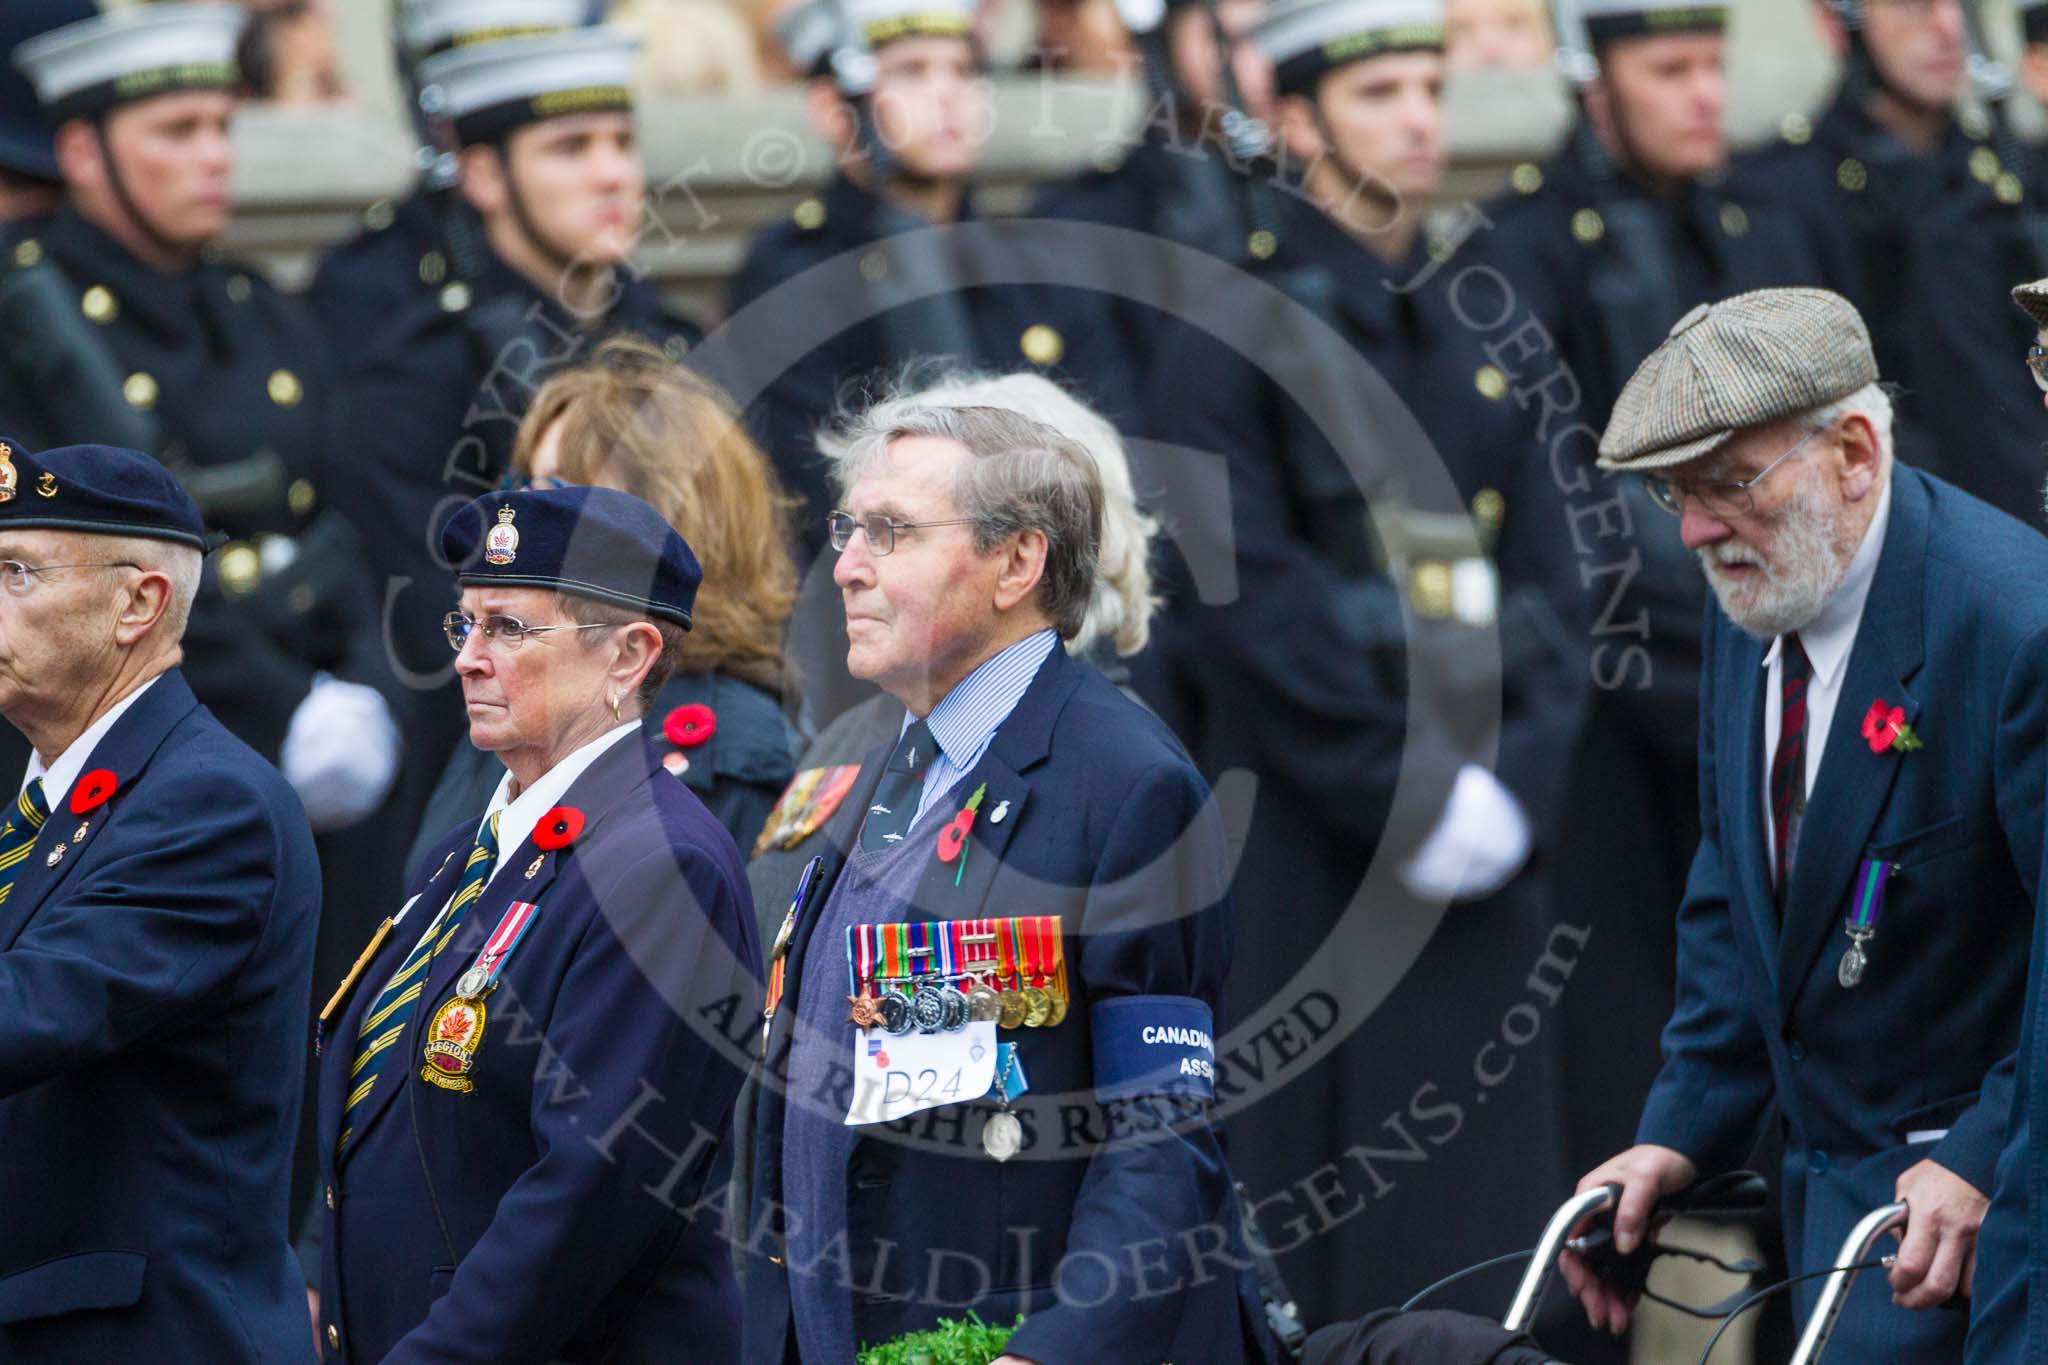 Remembrance Sunday at the Cenotaph 2015: Group D24, Canadian Veterans Association.
Cenotaph, Whitehall, London SW1,
London,
Greater London,
United Kingdom,
on 08 November 2015 at 11:55, image #728